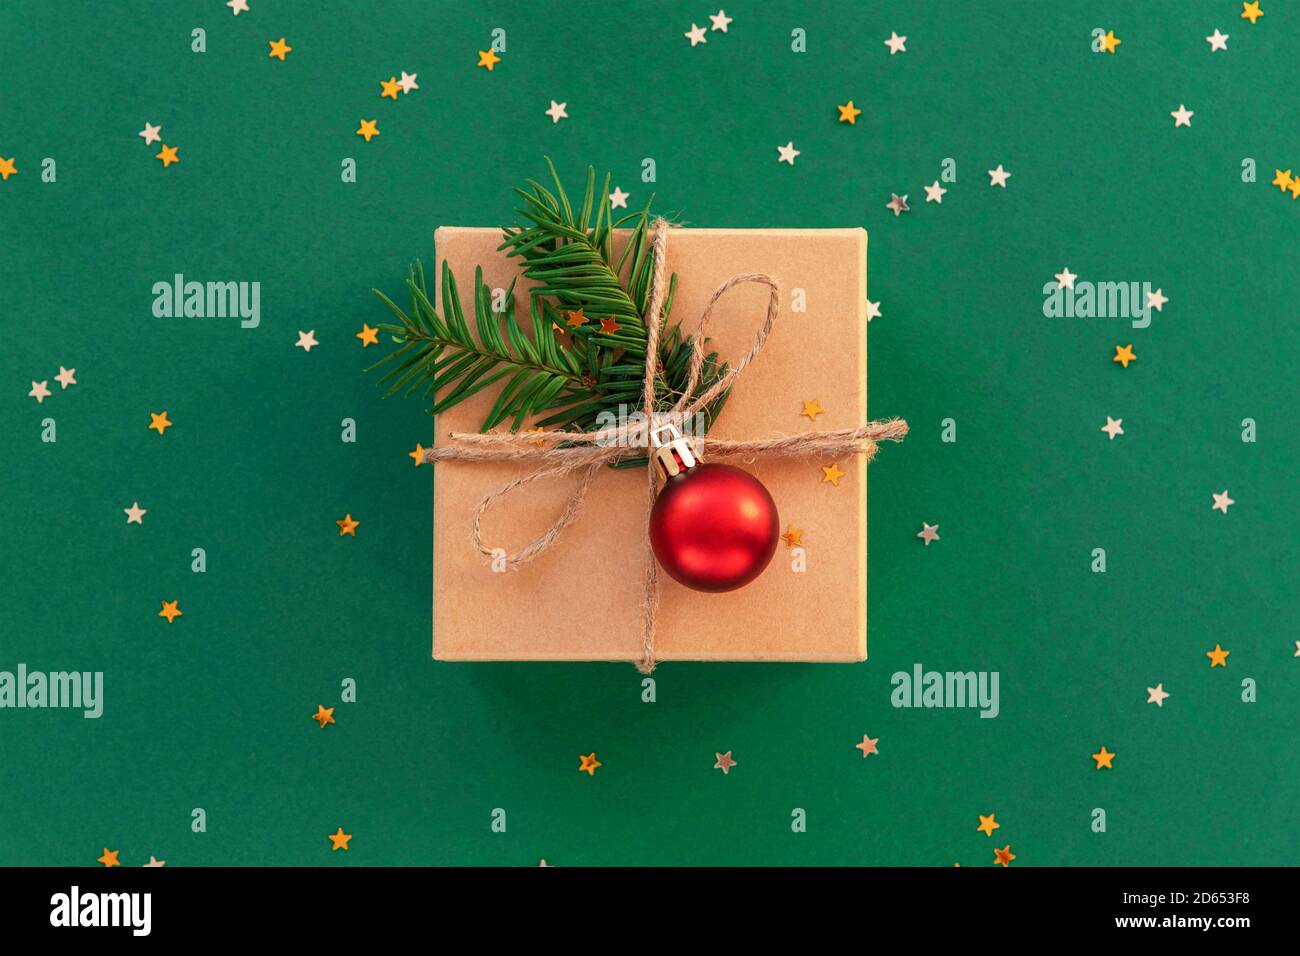 Christmas gift in a box with red ball and confetti on green background. Top view, flat lay. Stock Photo